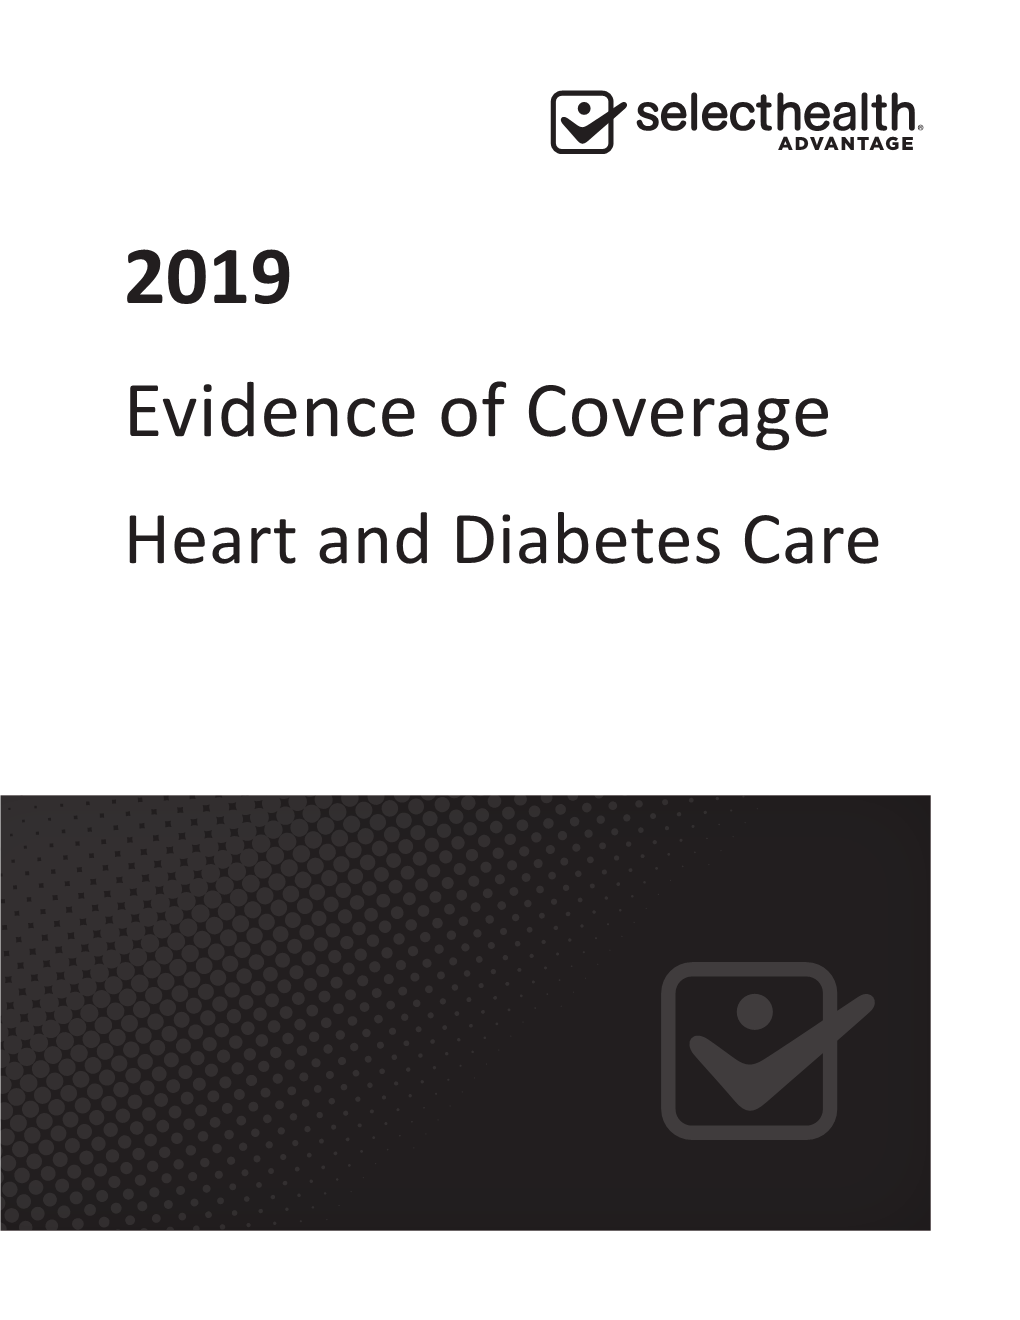 Evidence of Coverage Heart and Diabetes Care